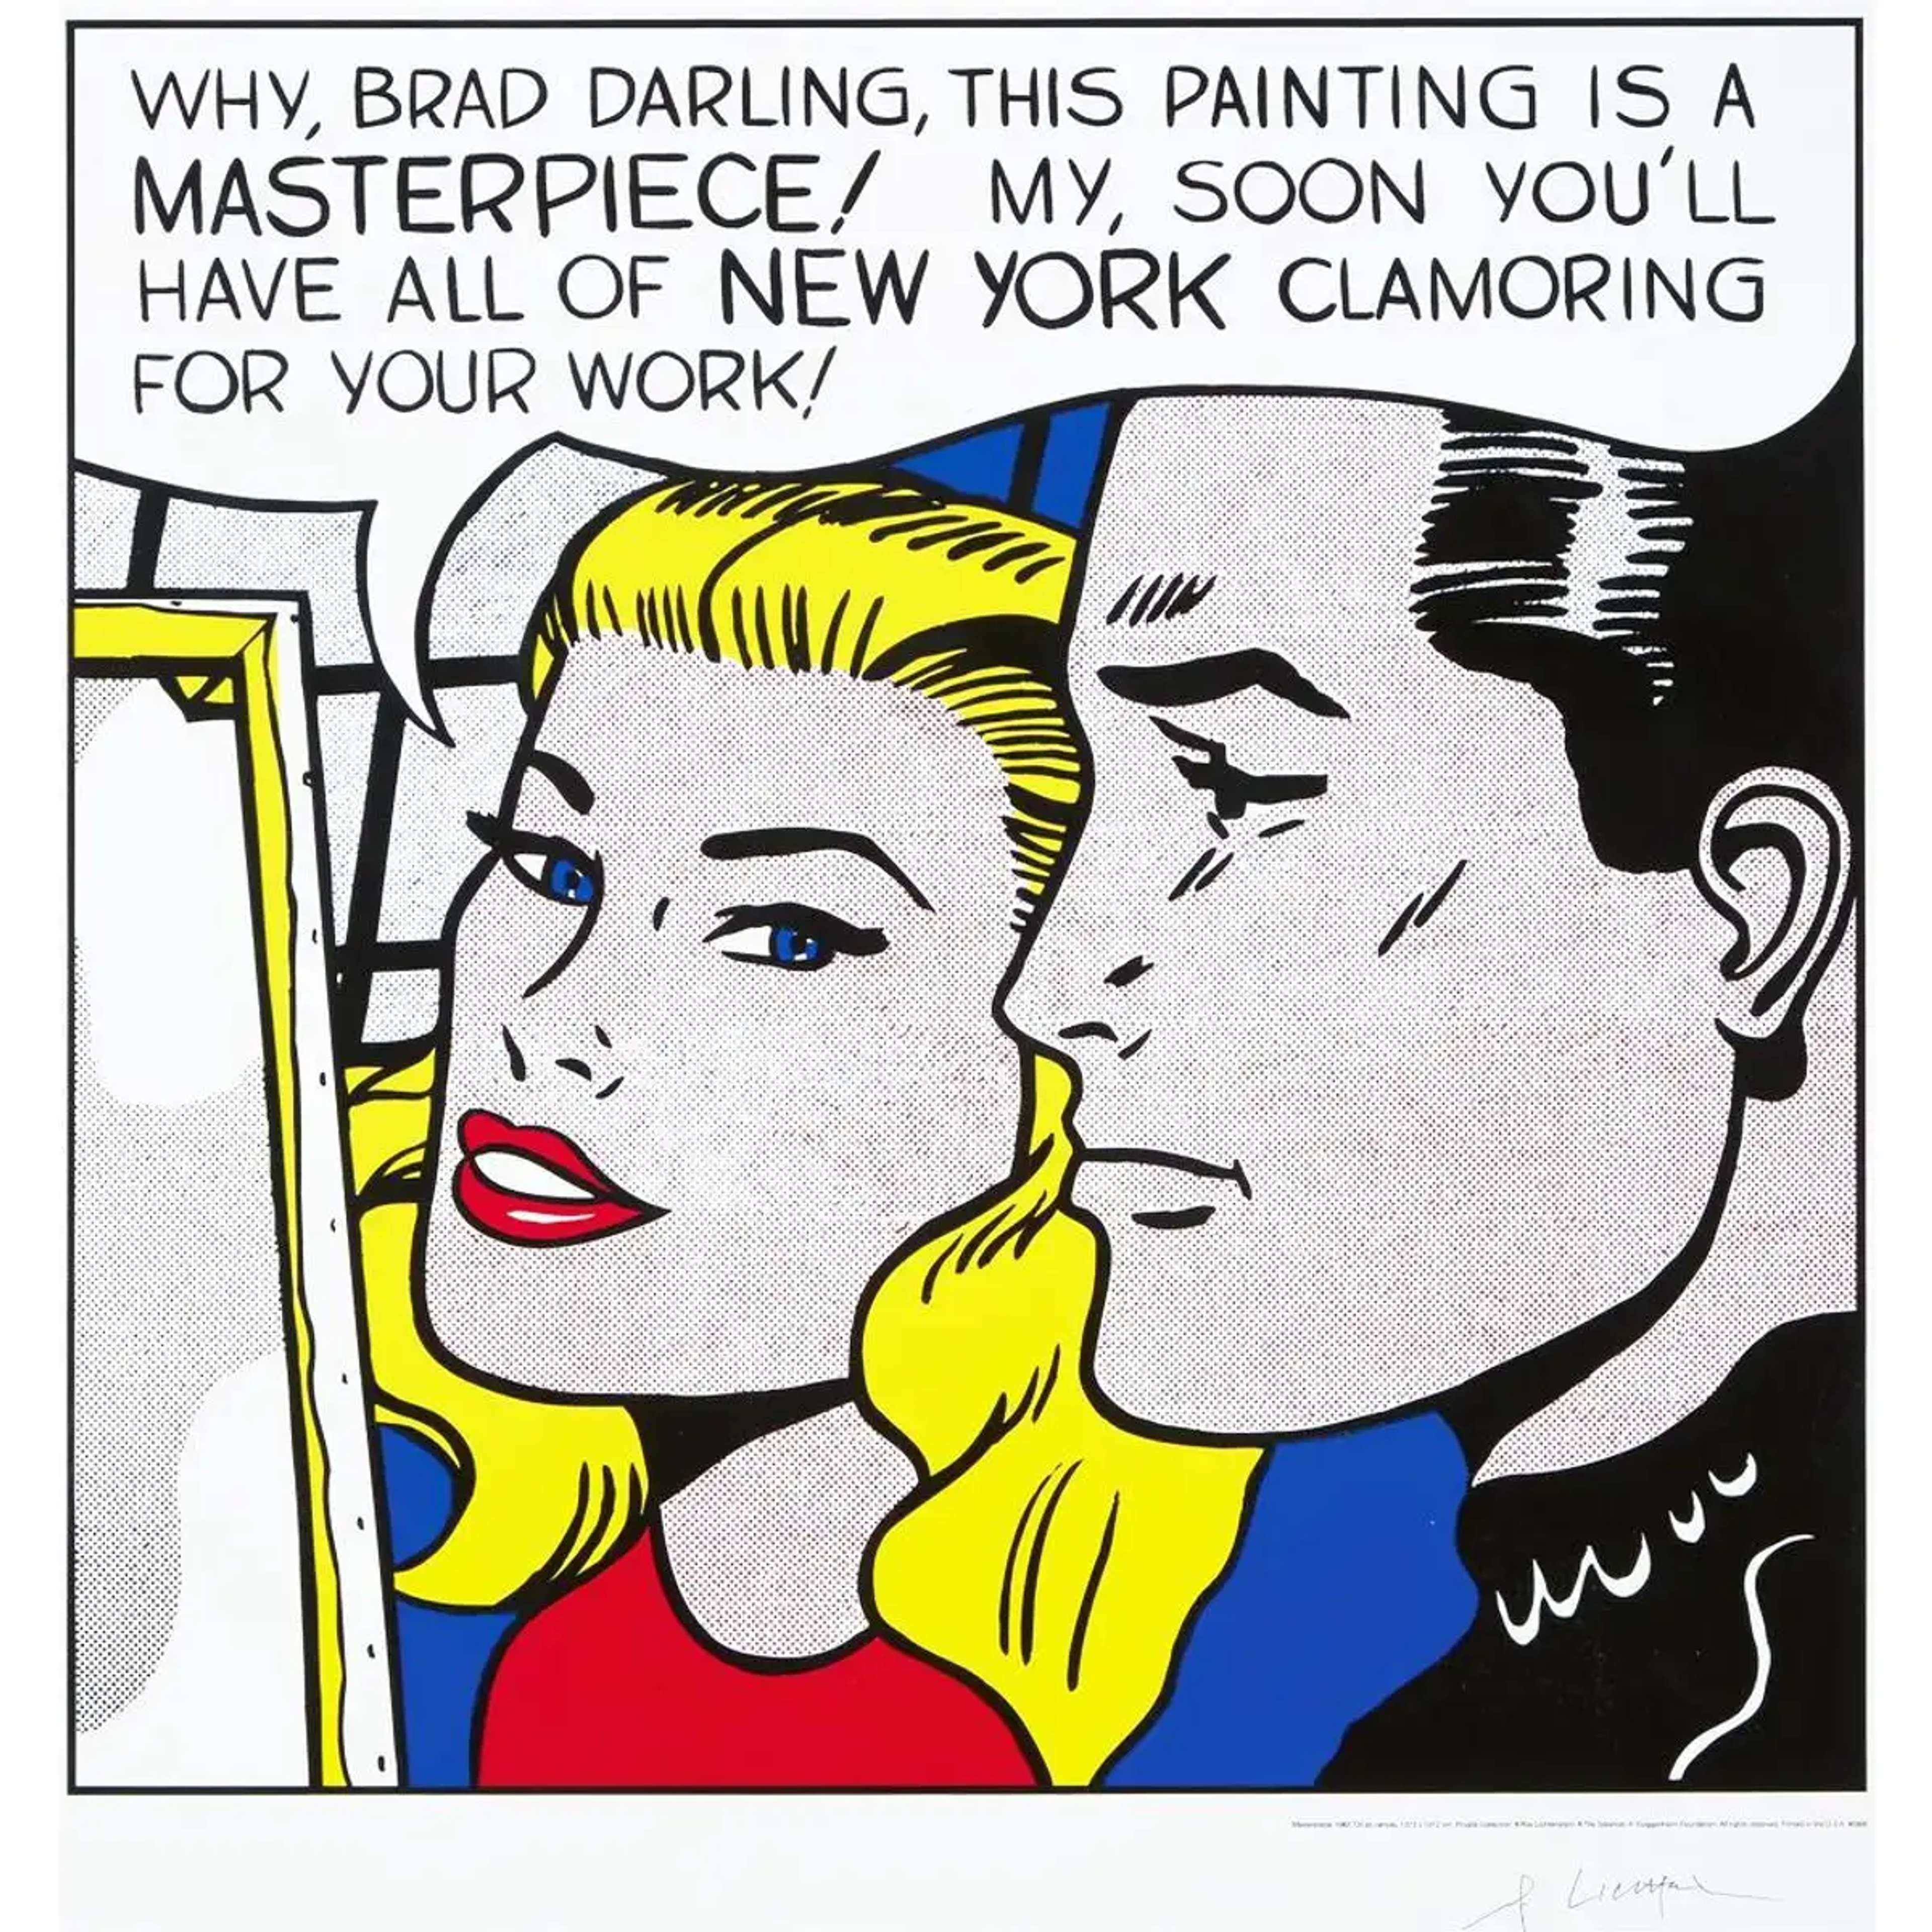 A screenprint by Roy Lichtenstein mimicking a comic book scene. A blonde woman looks to a man in a foreground, with a speech bubble reading: “WHY, BRAD DARLING, THIS PAINTING IS A MASTERPIECE! MY, SOON YOU'LL HAVE ALL OF NEW YORK CLAMORING FOR YOUR WORK!”